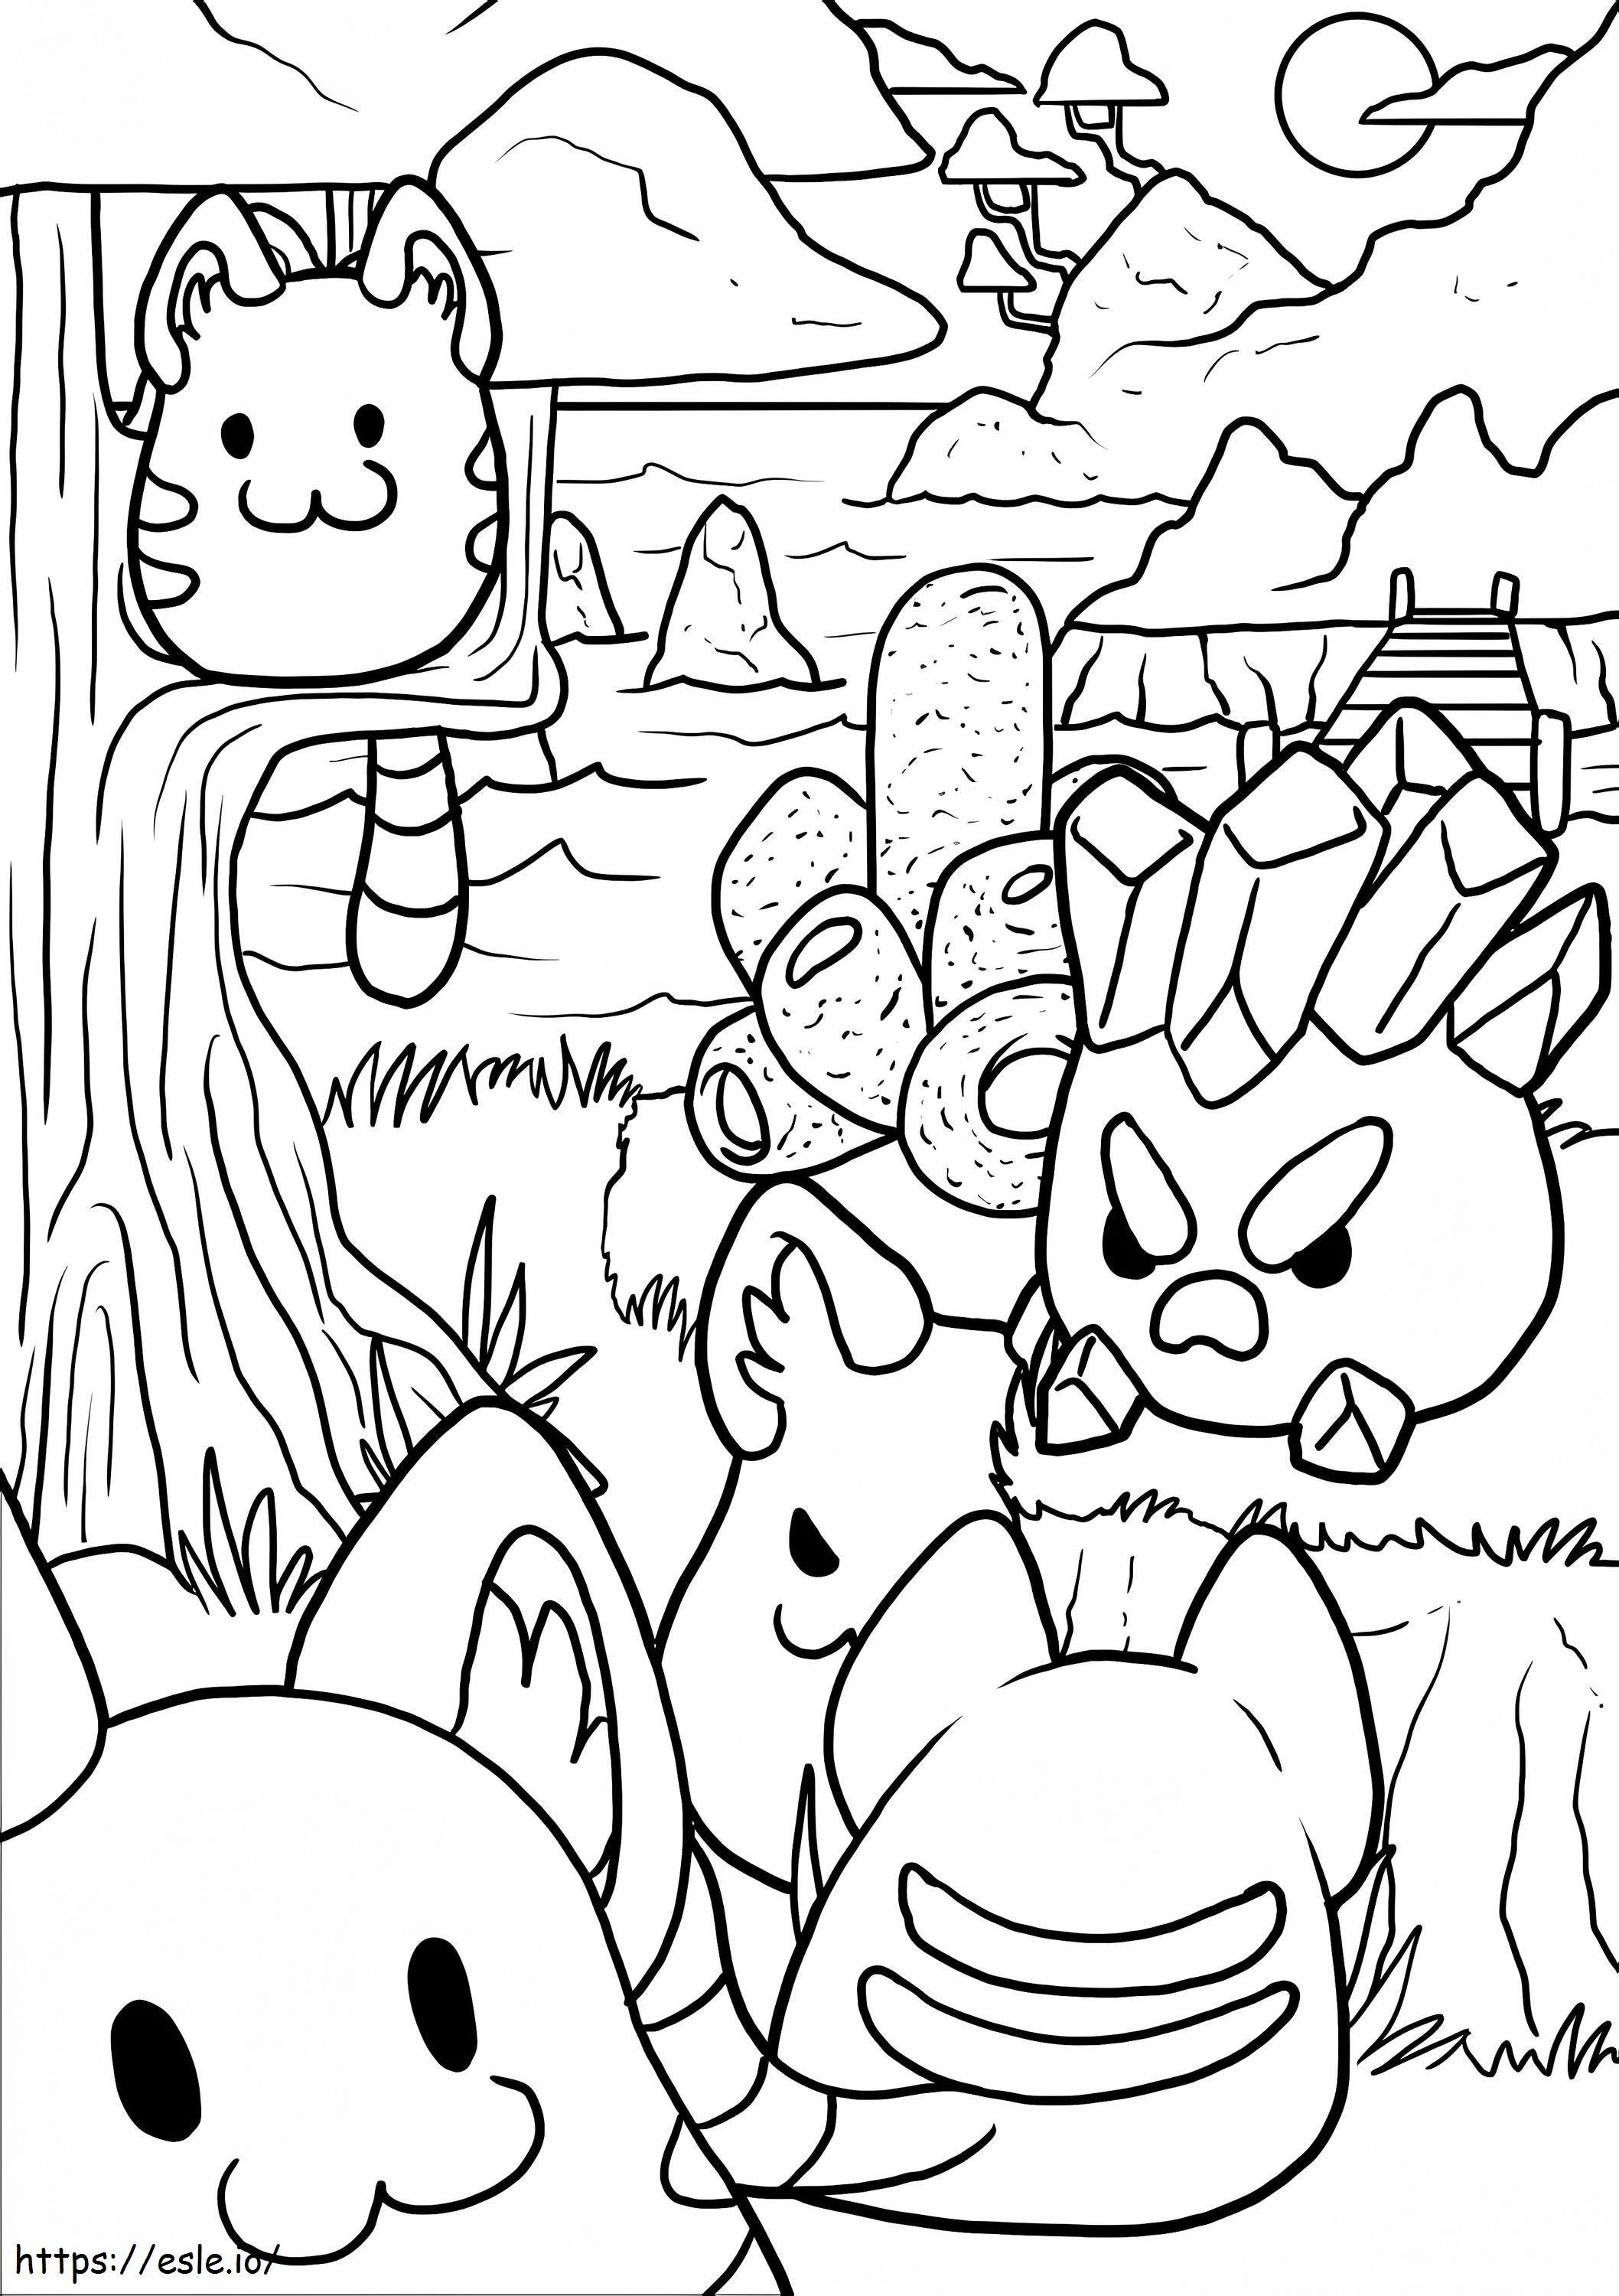 Slime Rancher 6 coloring page